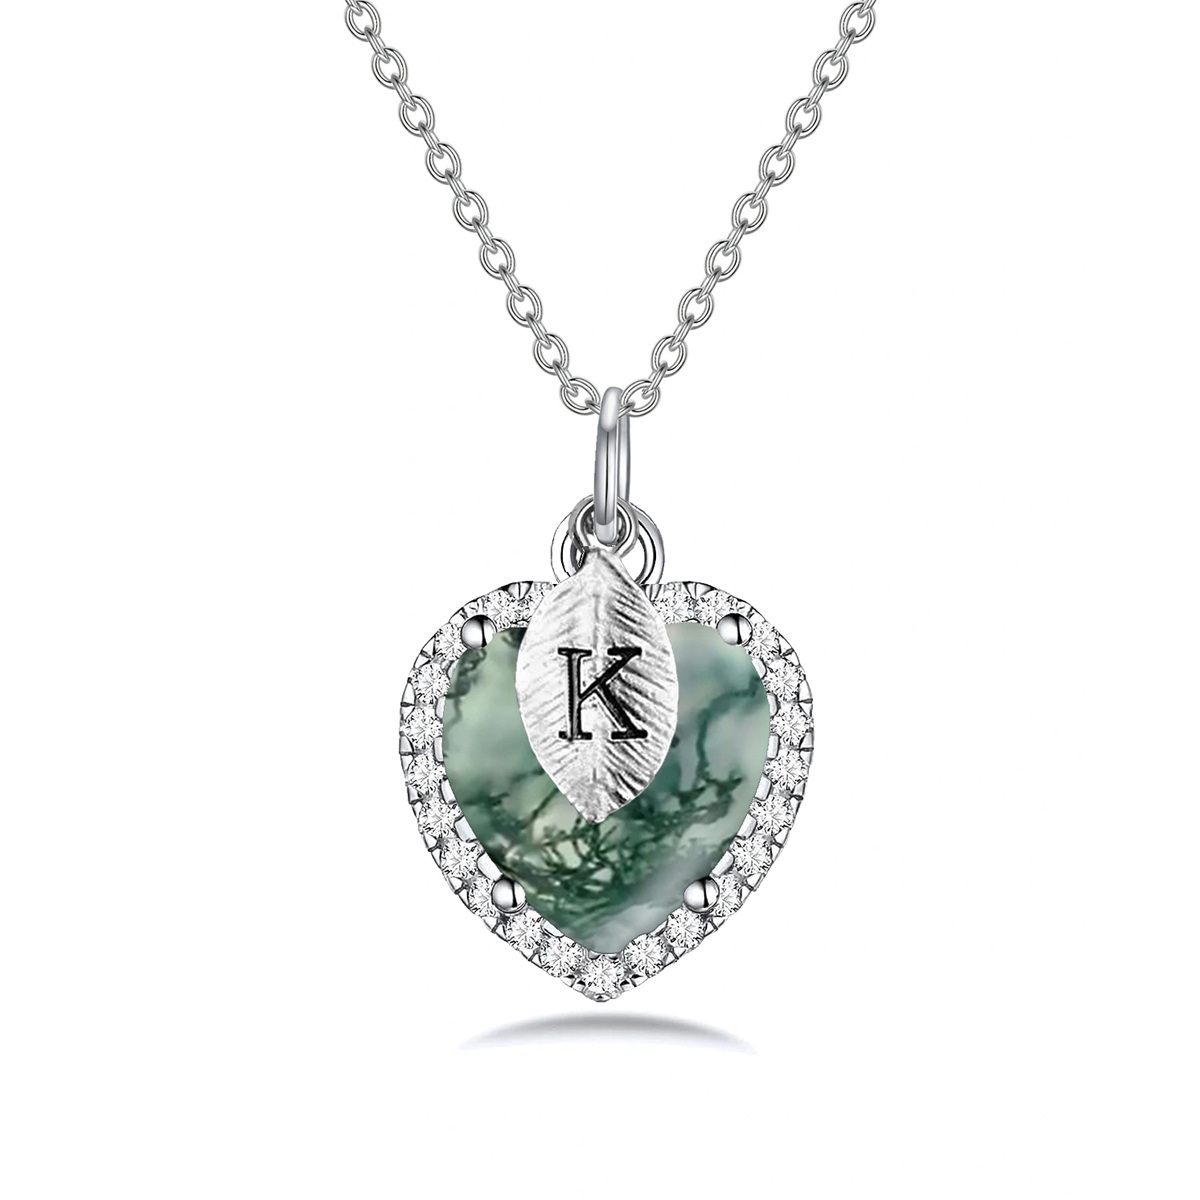 Sterling Silver Heart Shaped Moss Agate Heart Pendant Necklace with Initial Letter K-1